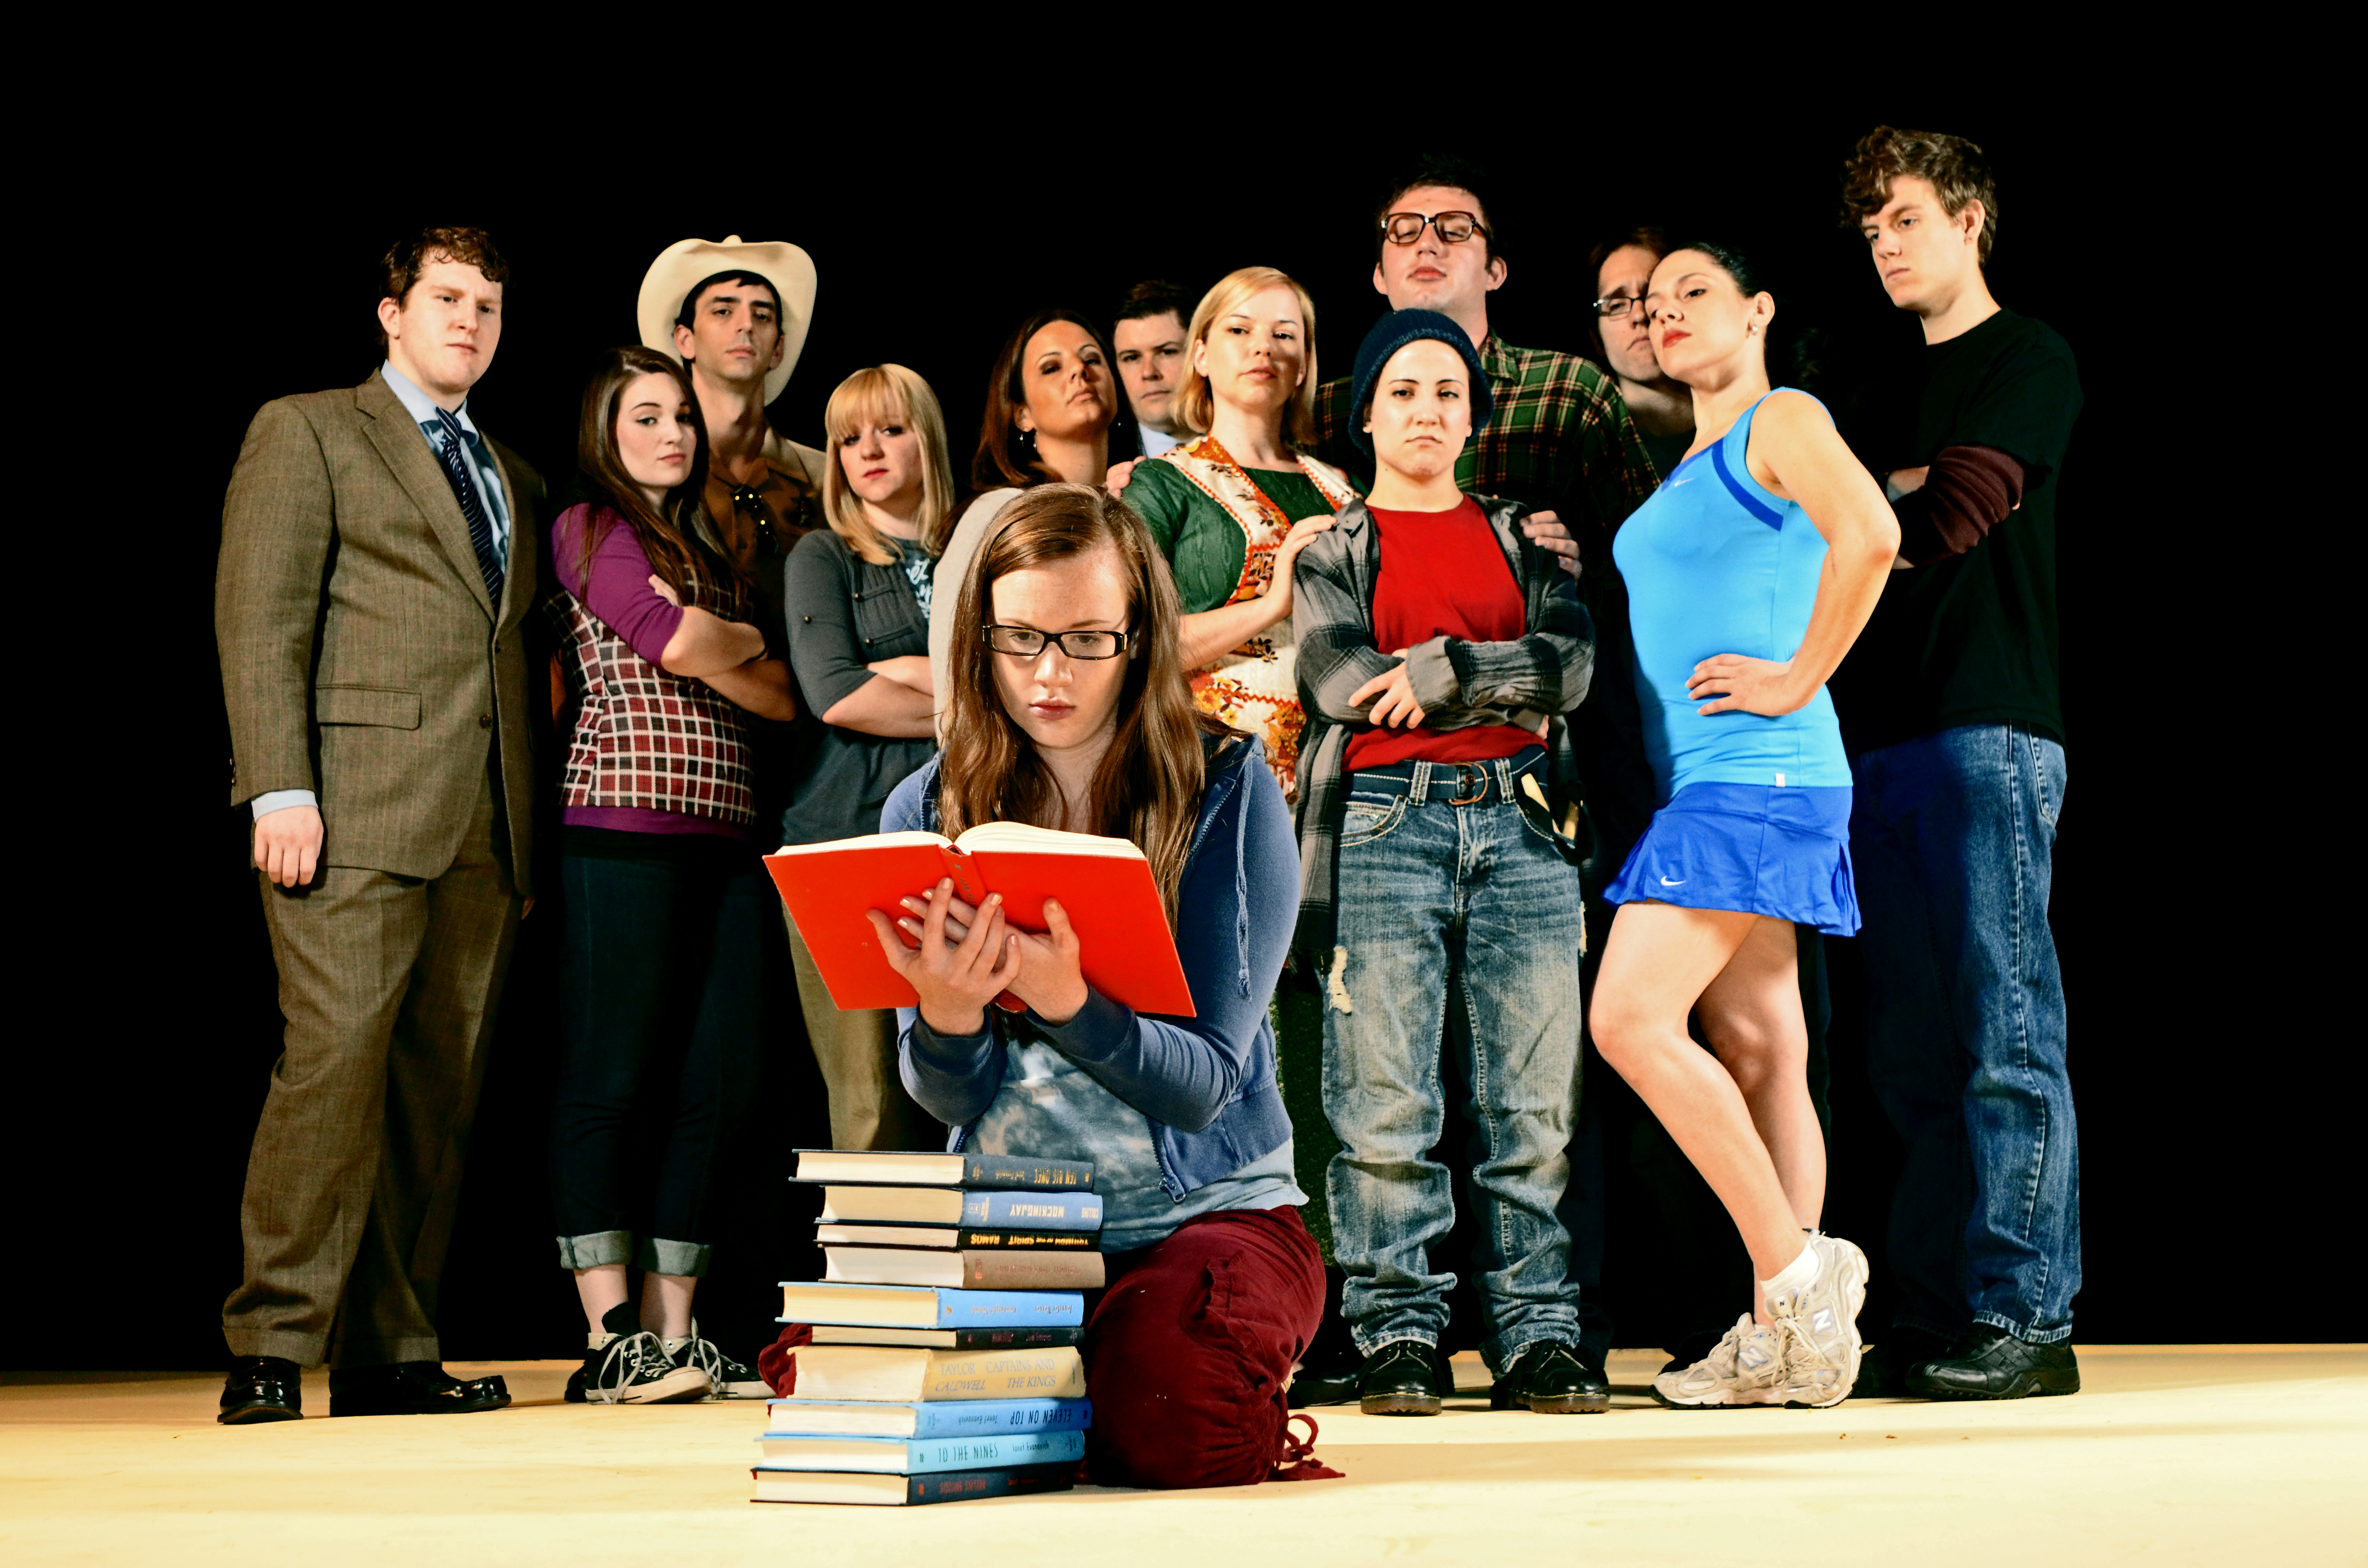 The cast of "The Sparrow," produced in Sept. 2011 at Stray Cat Theatre. Alyson Marie Maloney (front) had the lead role. (Photo, Stray Cat Theatre)